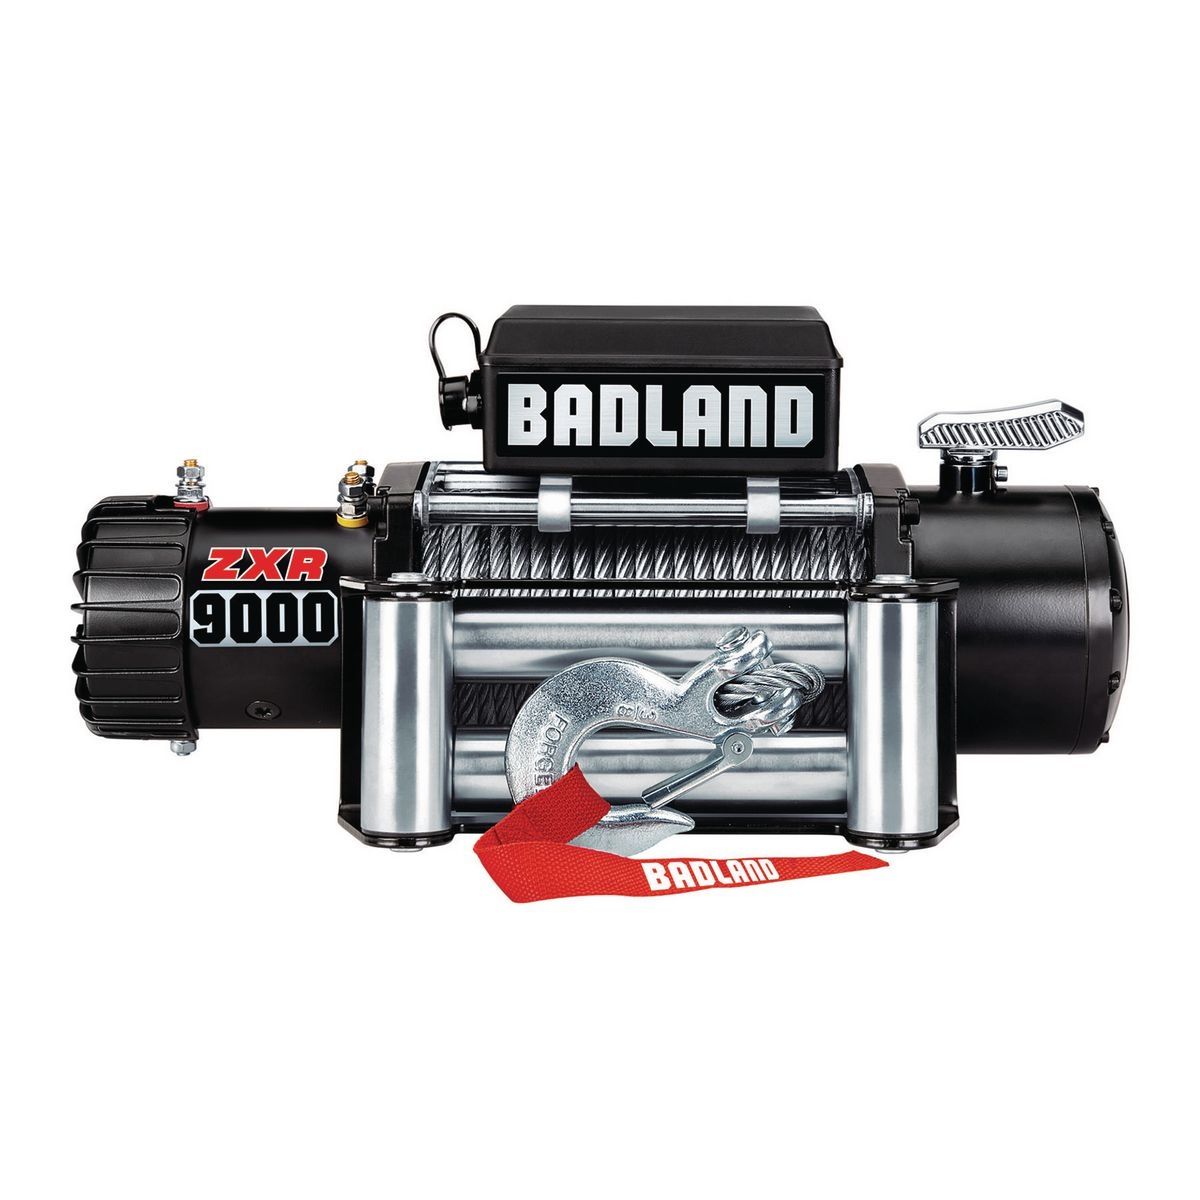 BADLAND ZXR 9000 lb. Truck/SUV Winch – Item 63769 / 64047 / 64048 How To Use Badland Winch Without Remote